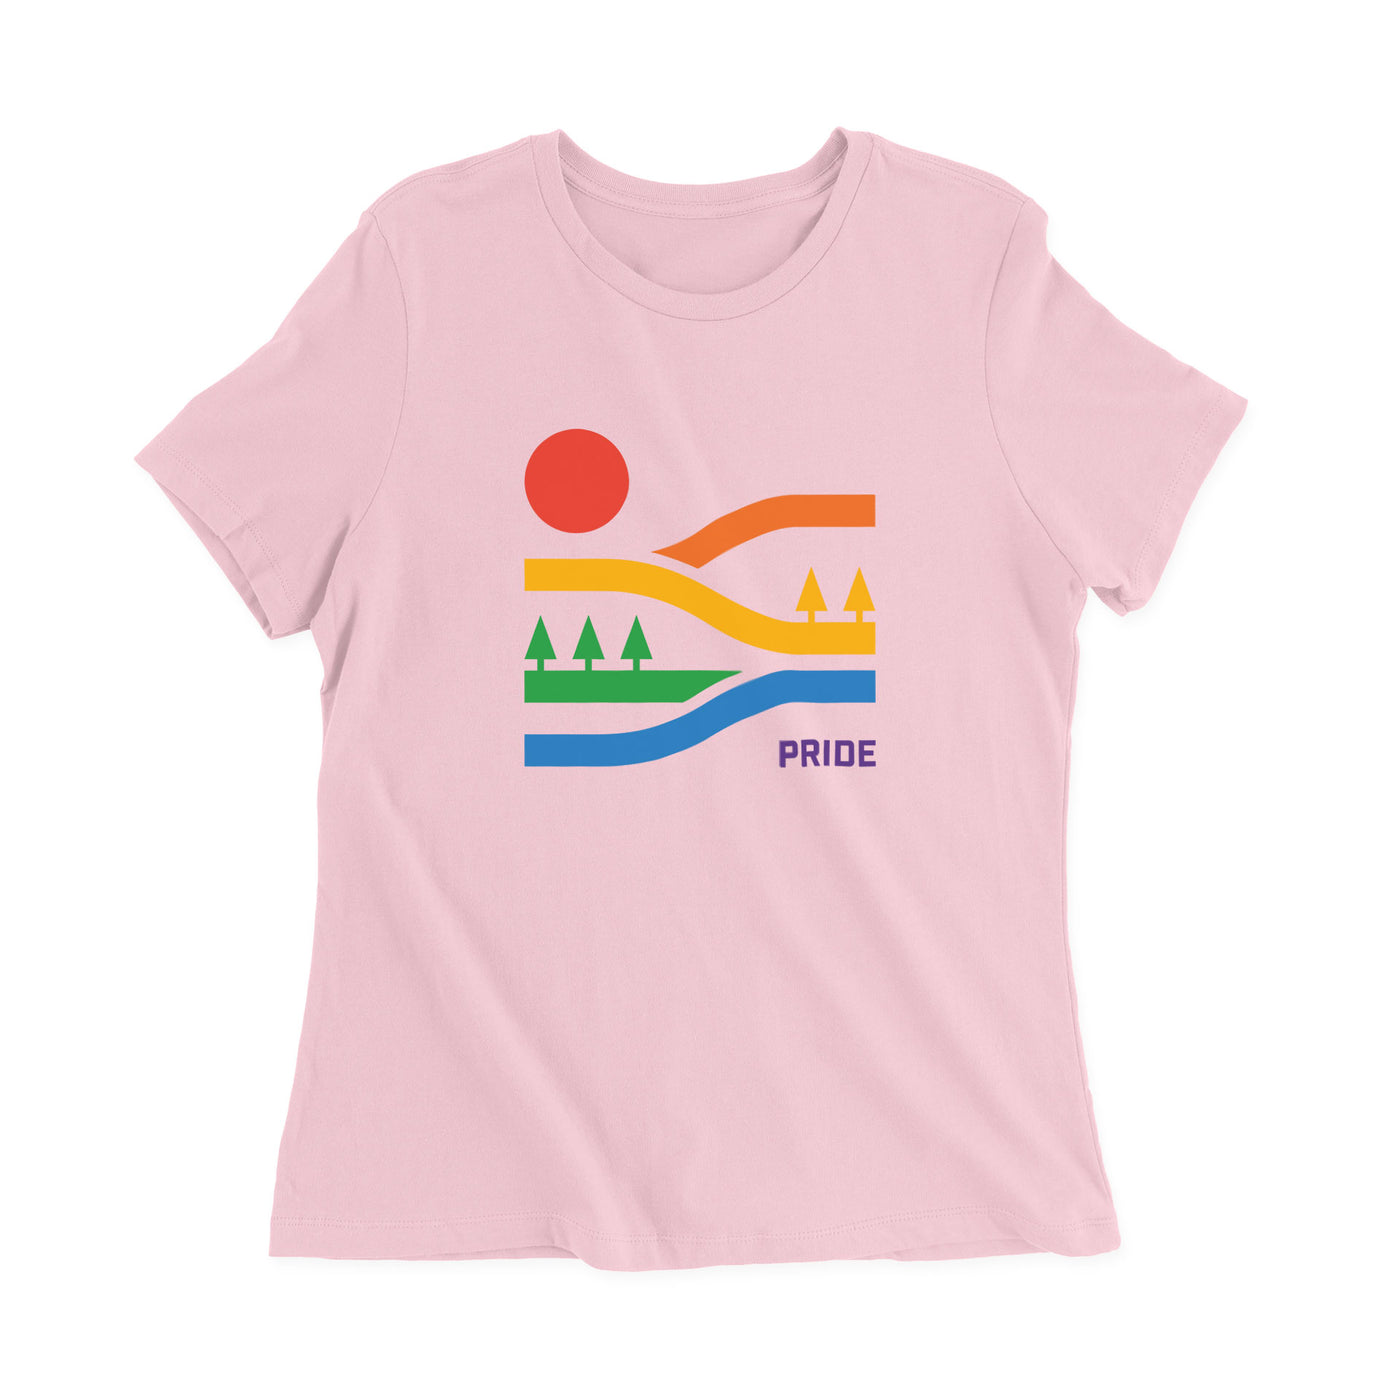 Women's Pride Relaxed Fit Tee - Pink (Medium)